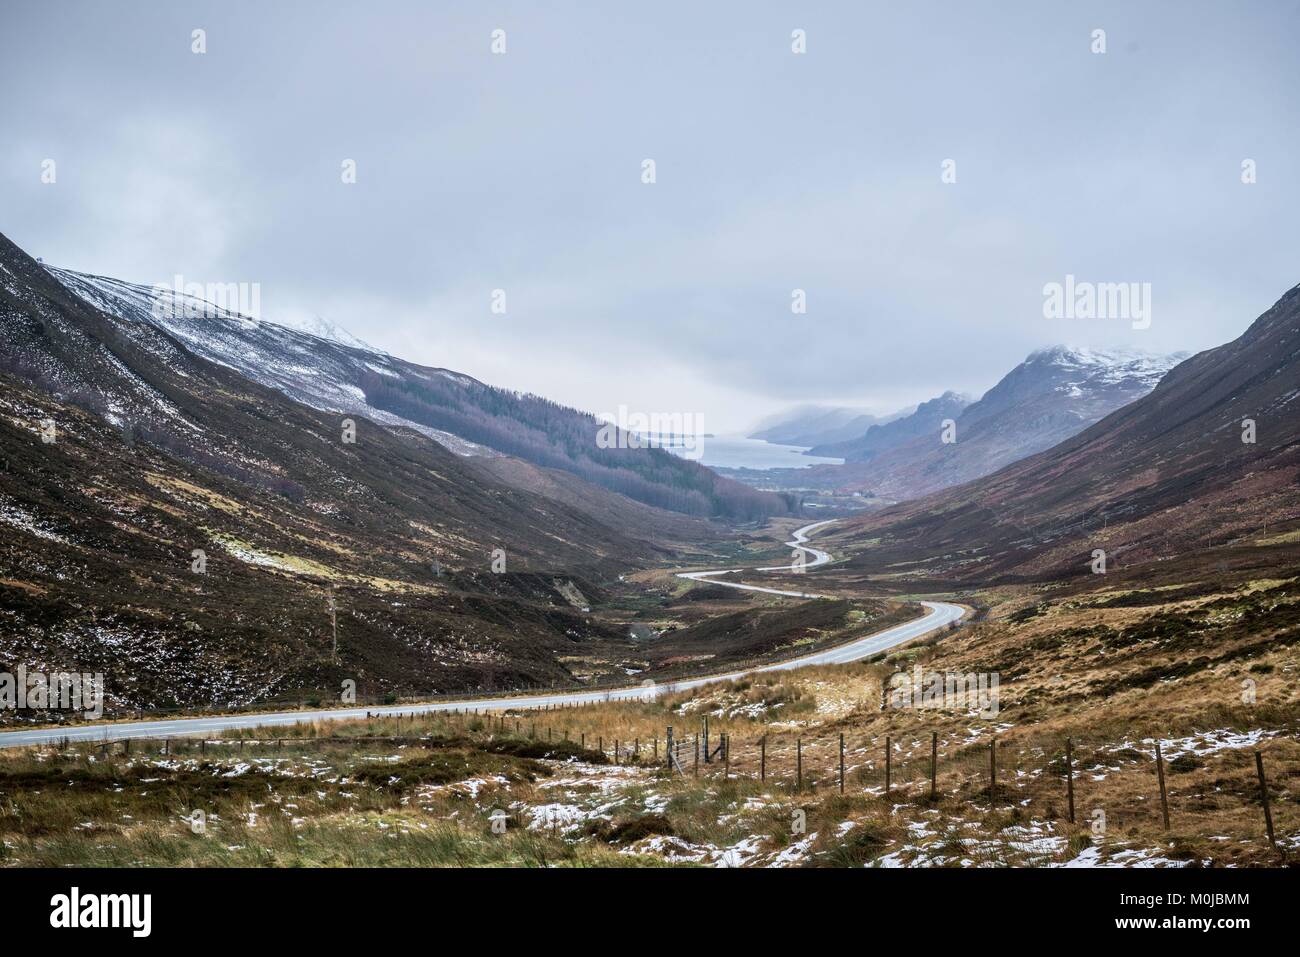 A stunning viewpoint on the A832 to Gairloch, in Glen Docherty, Scotland showing the winding road down to Kinlochewe and the tip of Loch Maree. Stock Photo